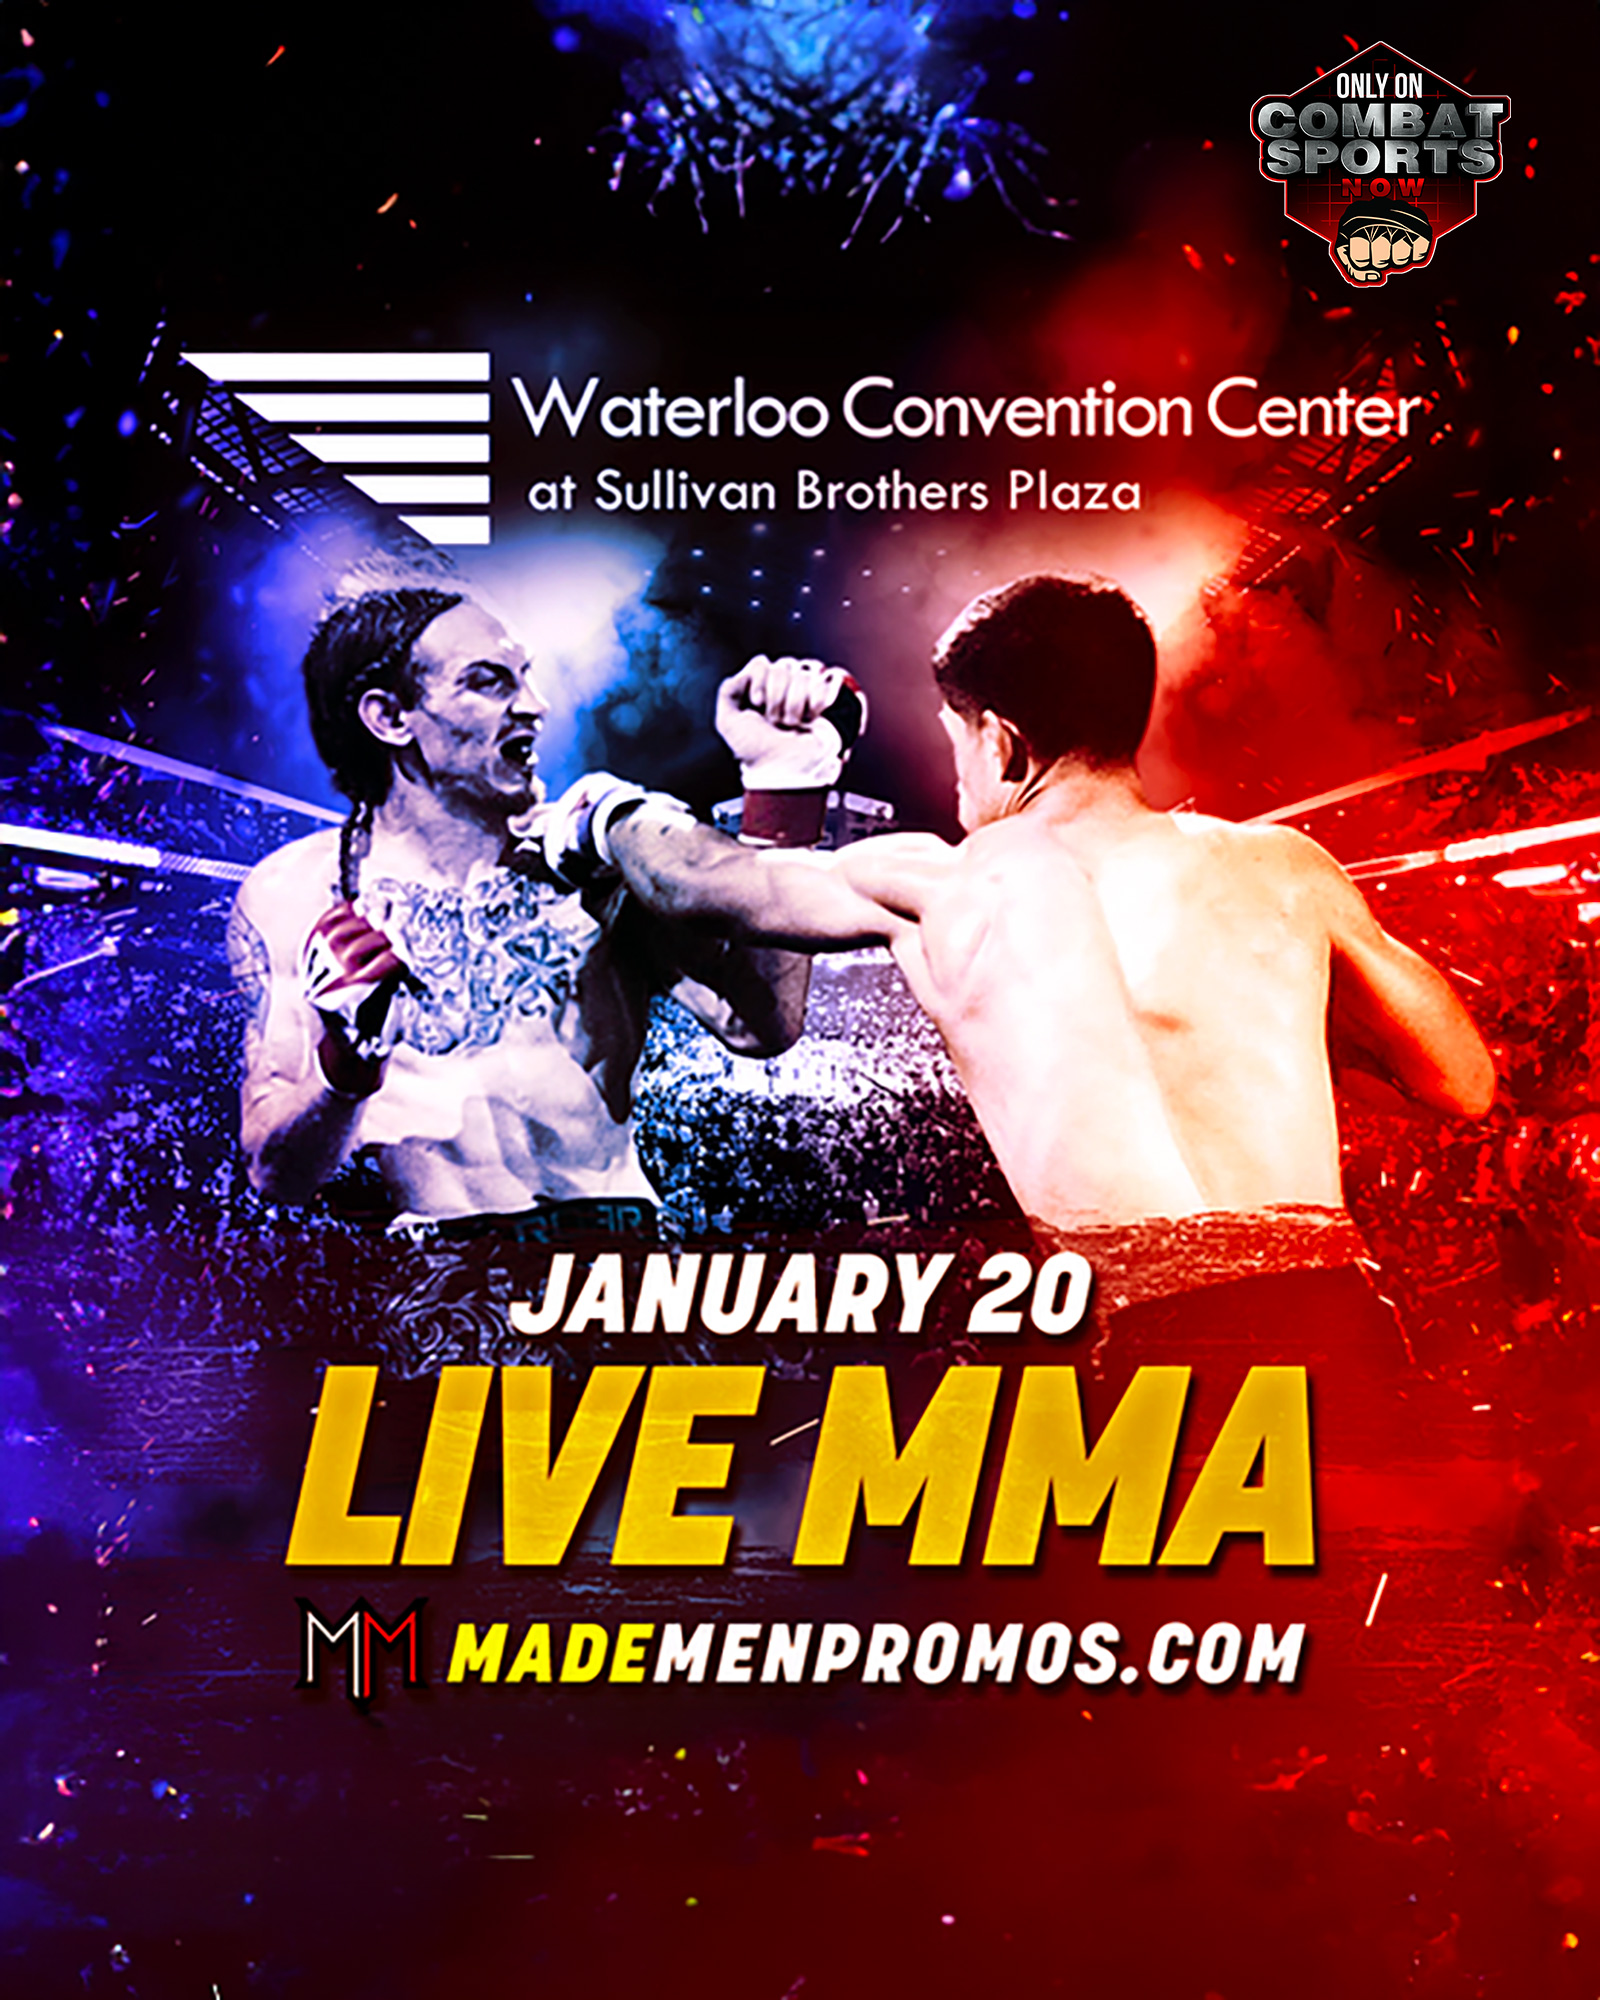 Watch Live MMA at Waterloo Convention Center on Combat Sports Now